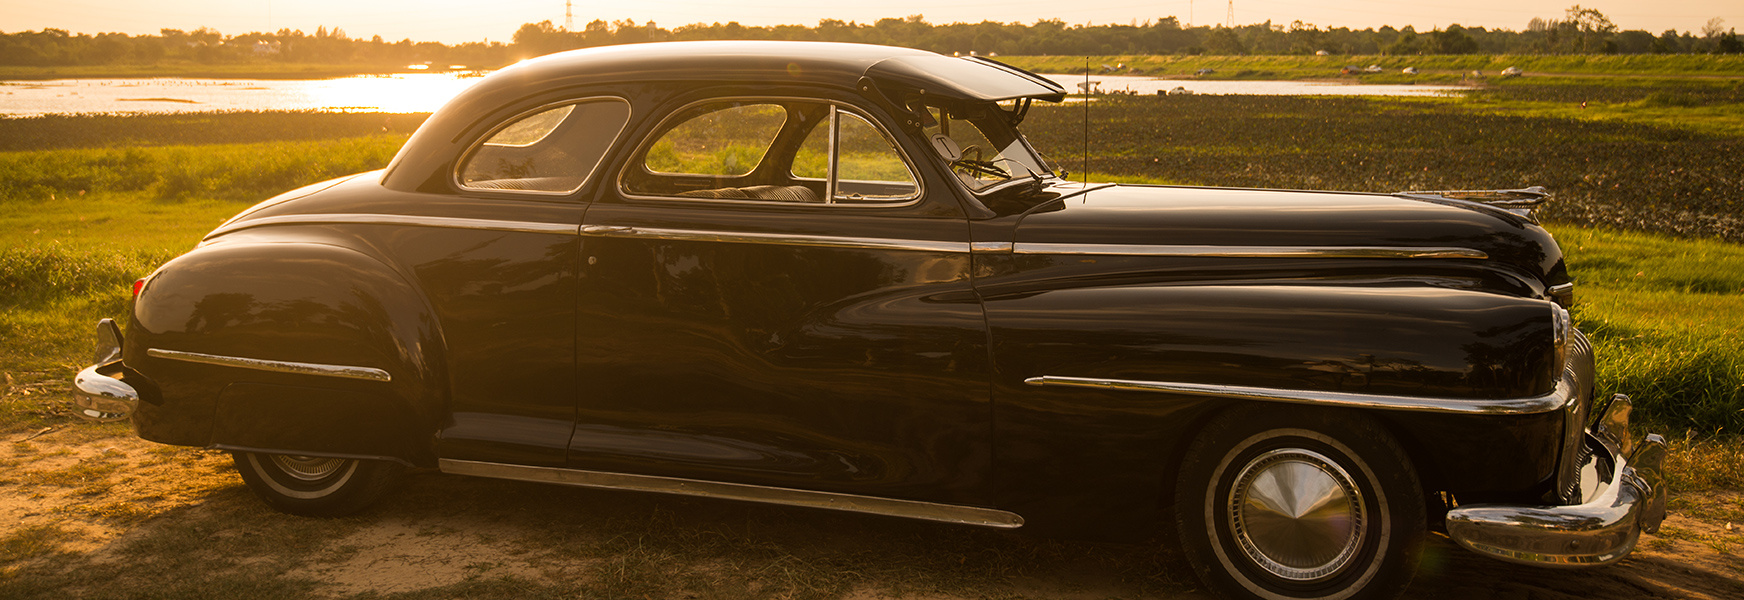 Vintage Automobile In Green Field At Dusk